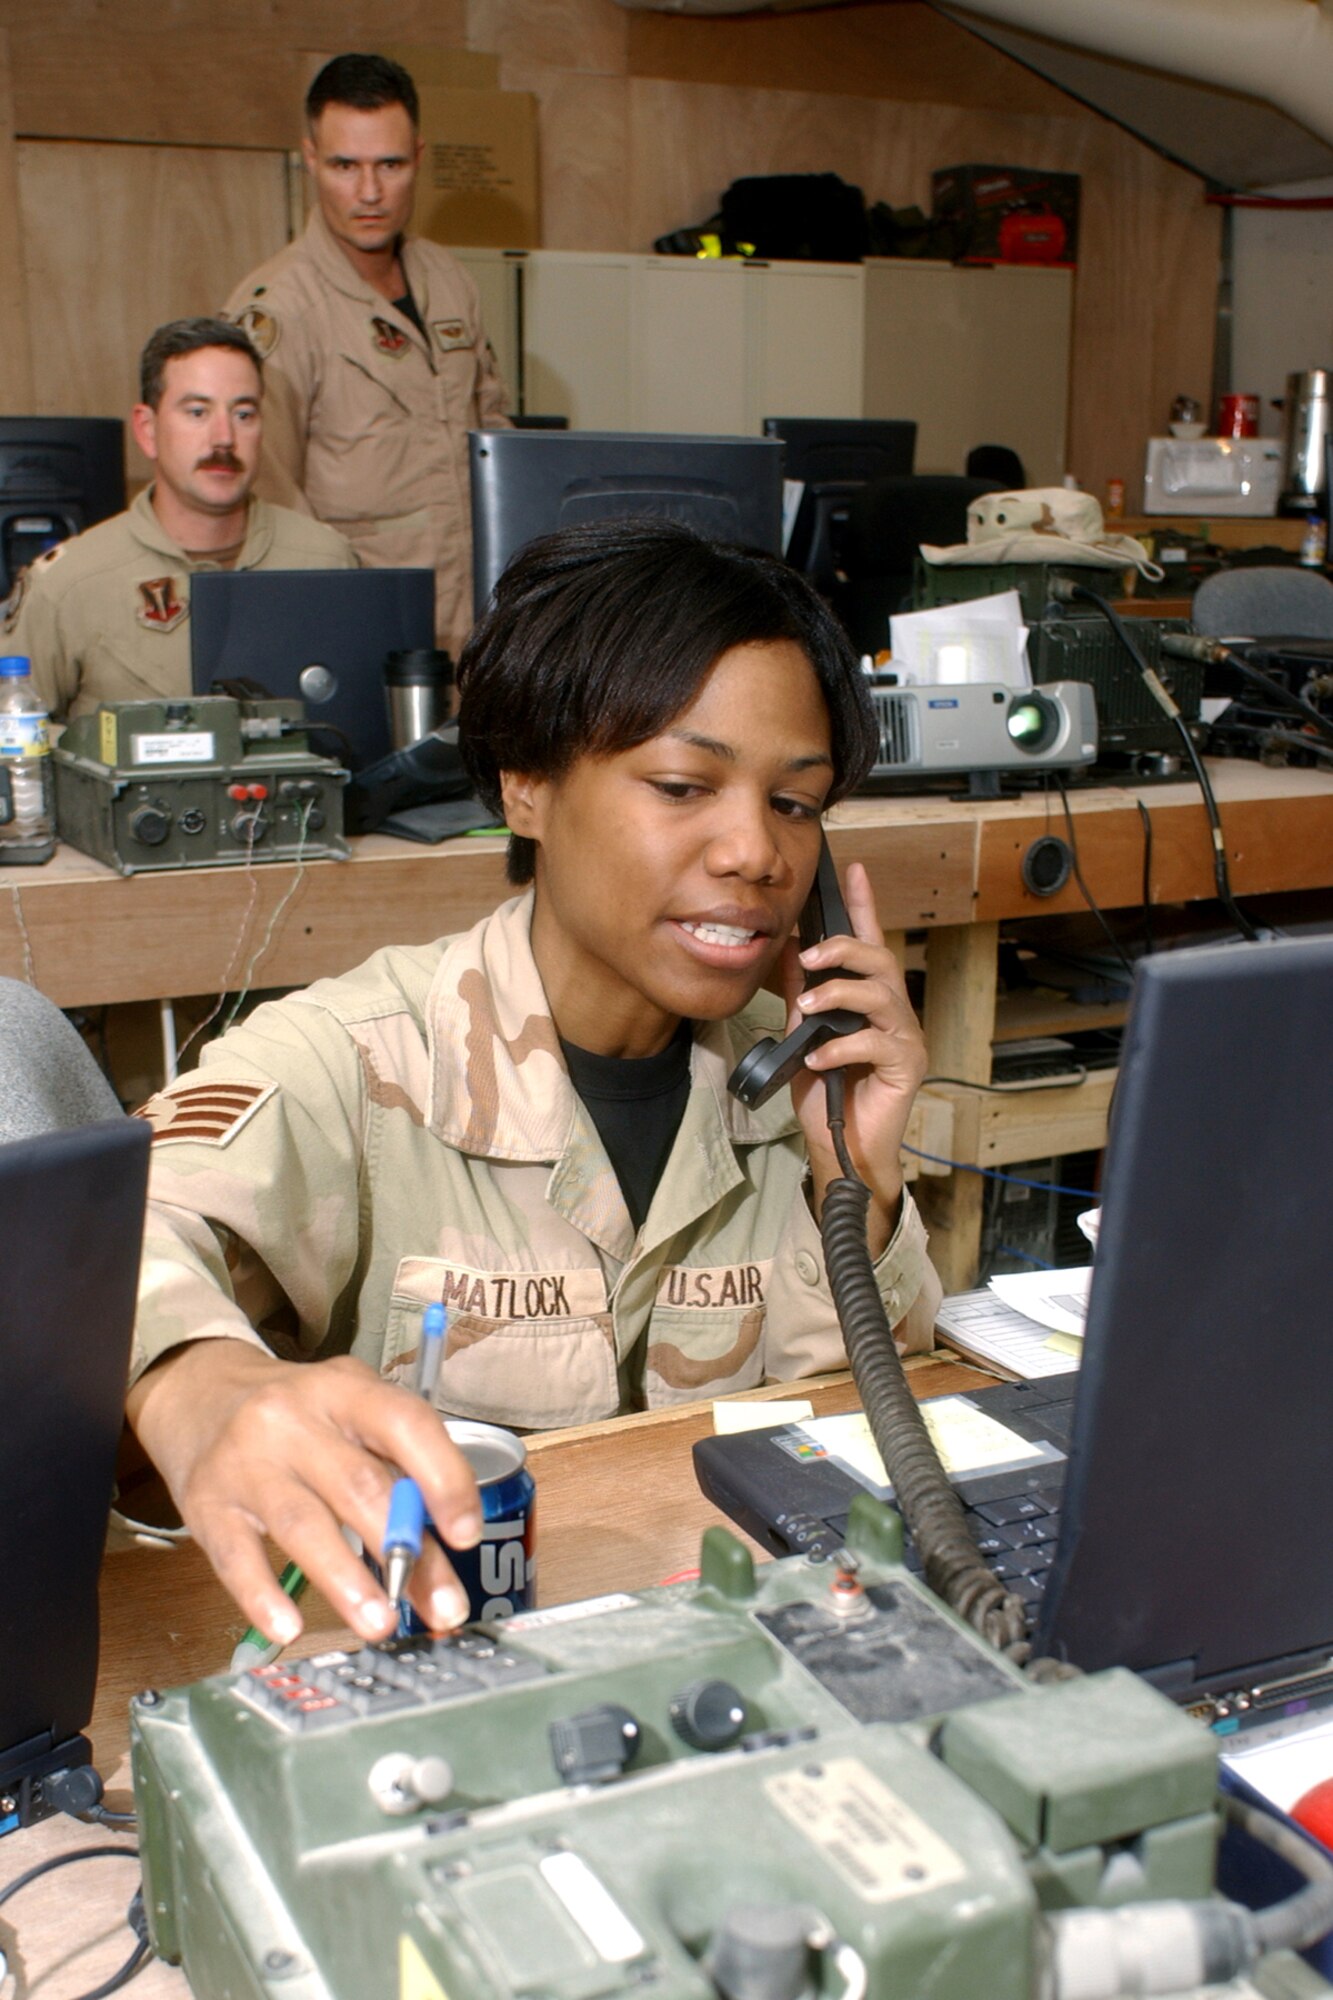 OPERATION IRAQI FREEDOM -- Staff Sgt. Selena Matlock tracks aircraft take off and landing times at the Coalition Operations Center, ensuring Air Tasking Orders are updated.  In the background, Lt. Col. Joseph Justice (standing) and Maj. David Wright, Coalition Operations Center directors, coordinate the flying schedule.  All are assigned to the 379th Air Expeditionary Wing at a deployed location. (U.S. Air Force photo by Master Sgt. Terry Blevins)